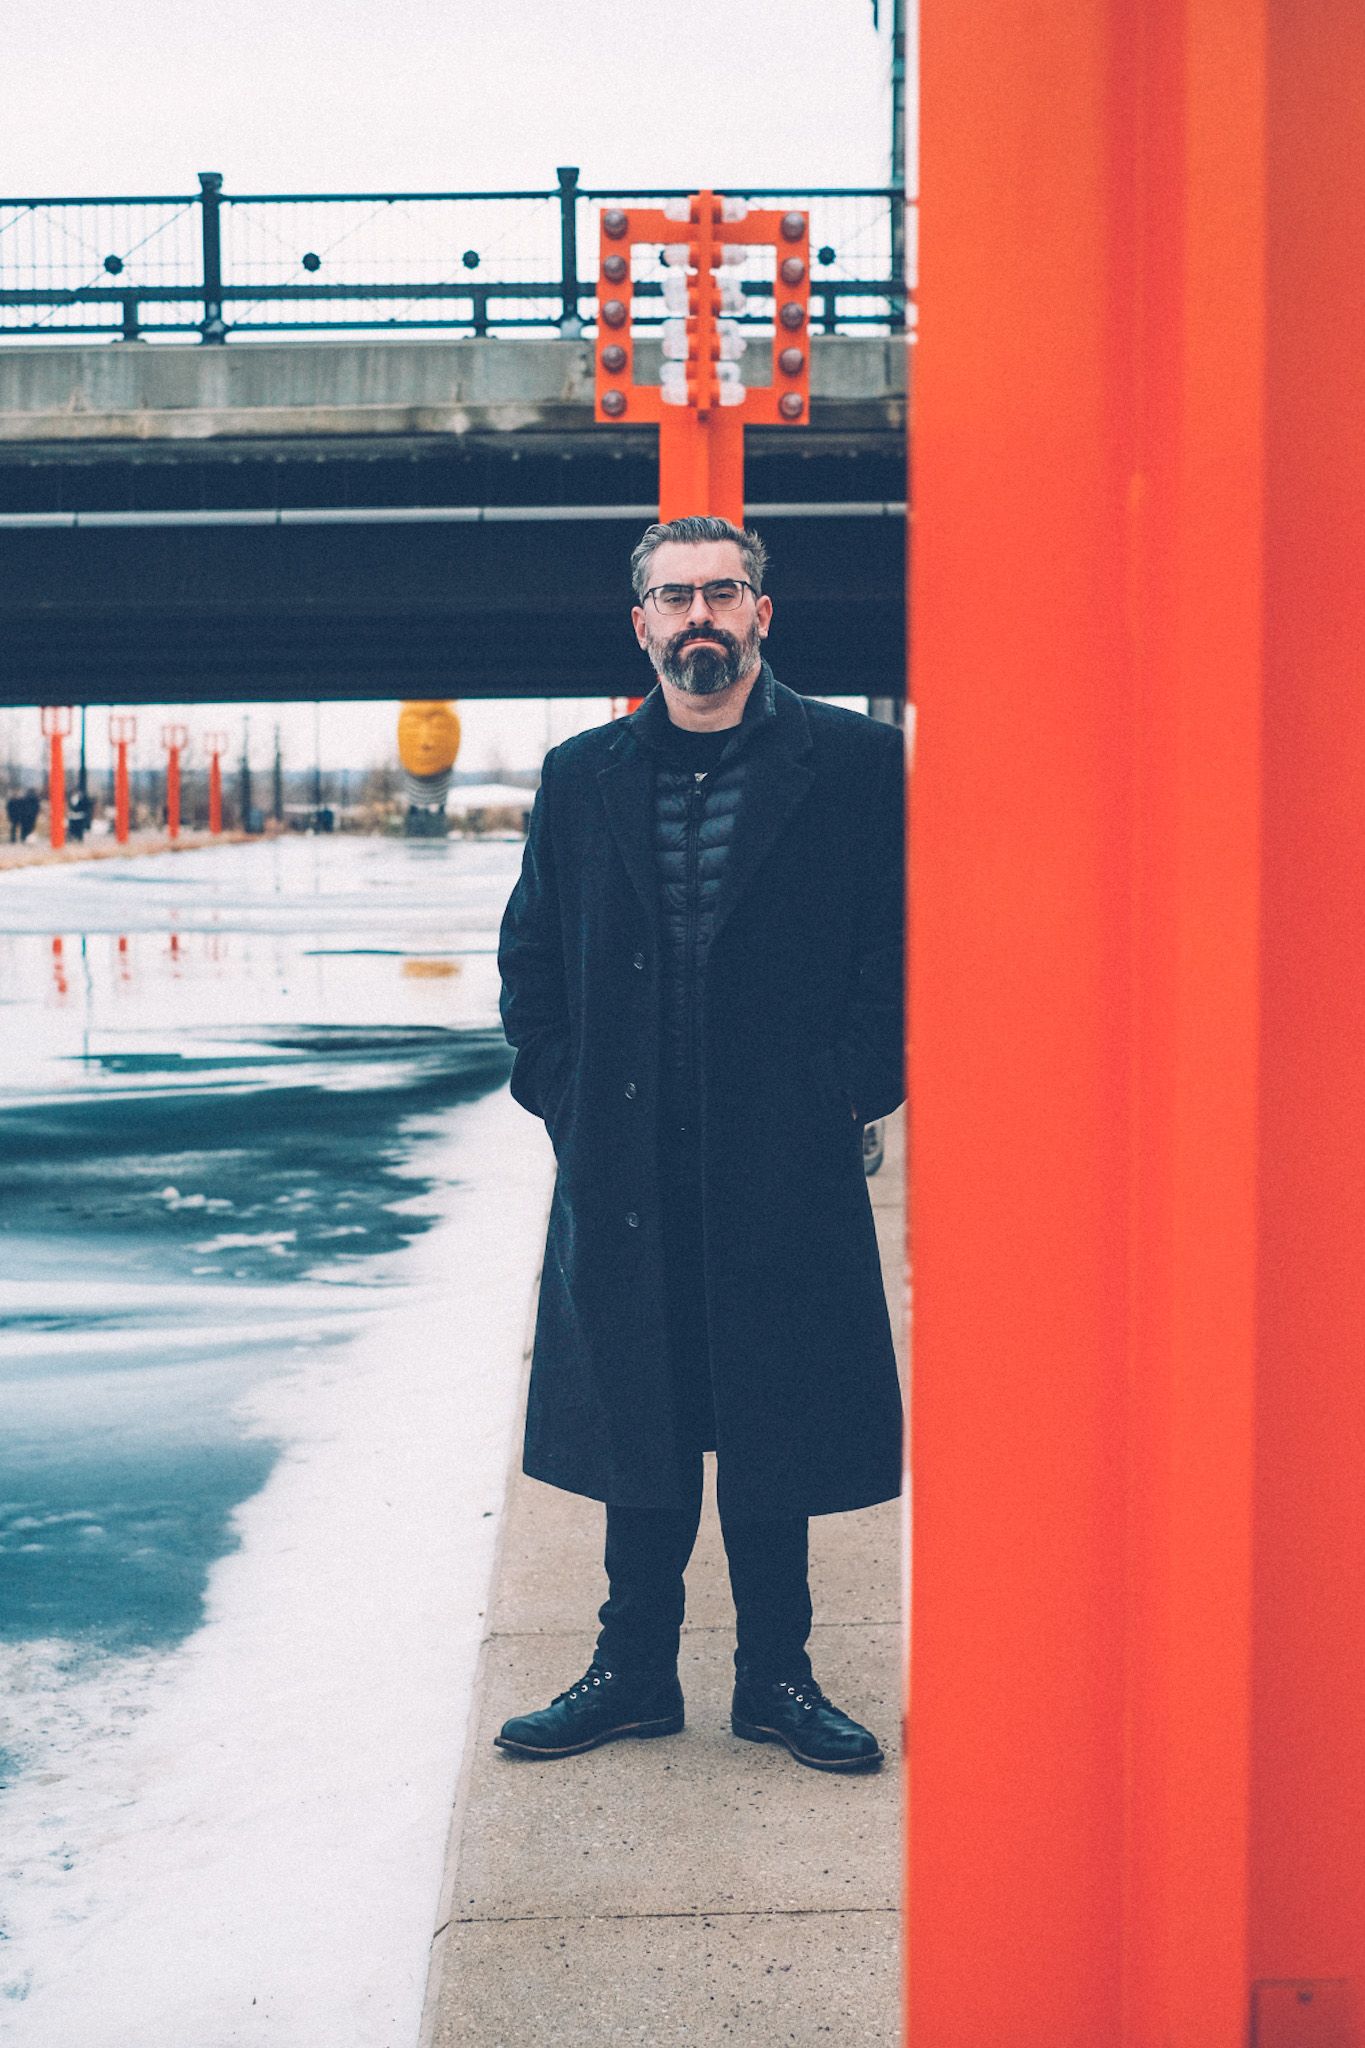 A man in a black peacoat stands beside a frozen body of water next to a sidewalk, partially obscured by an orange lamppost.